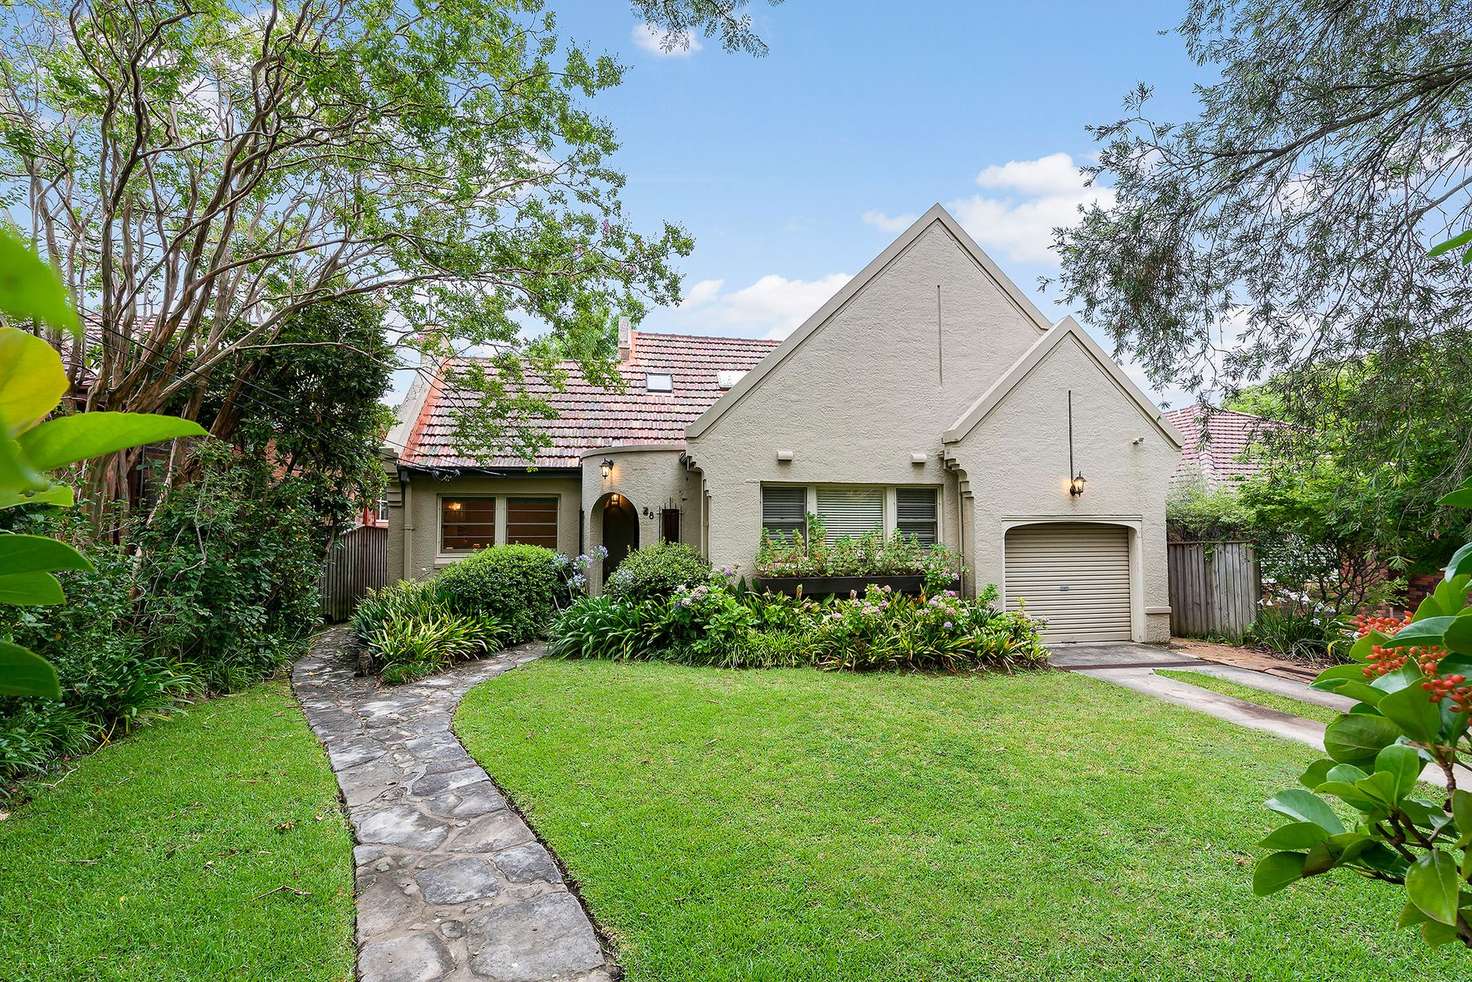 Main view of Homely house listing, 48 Earl Street, Roseville NSW 2069